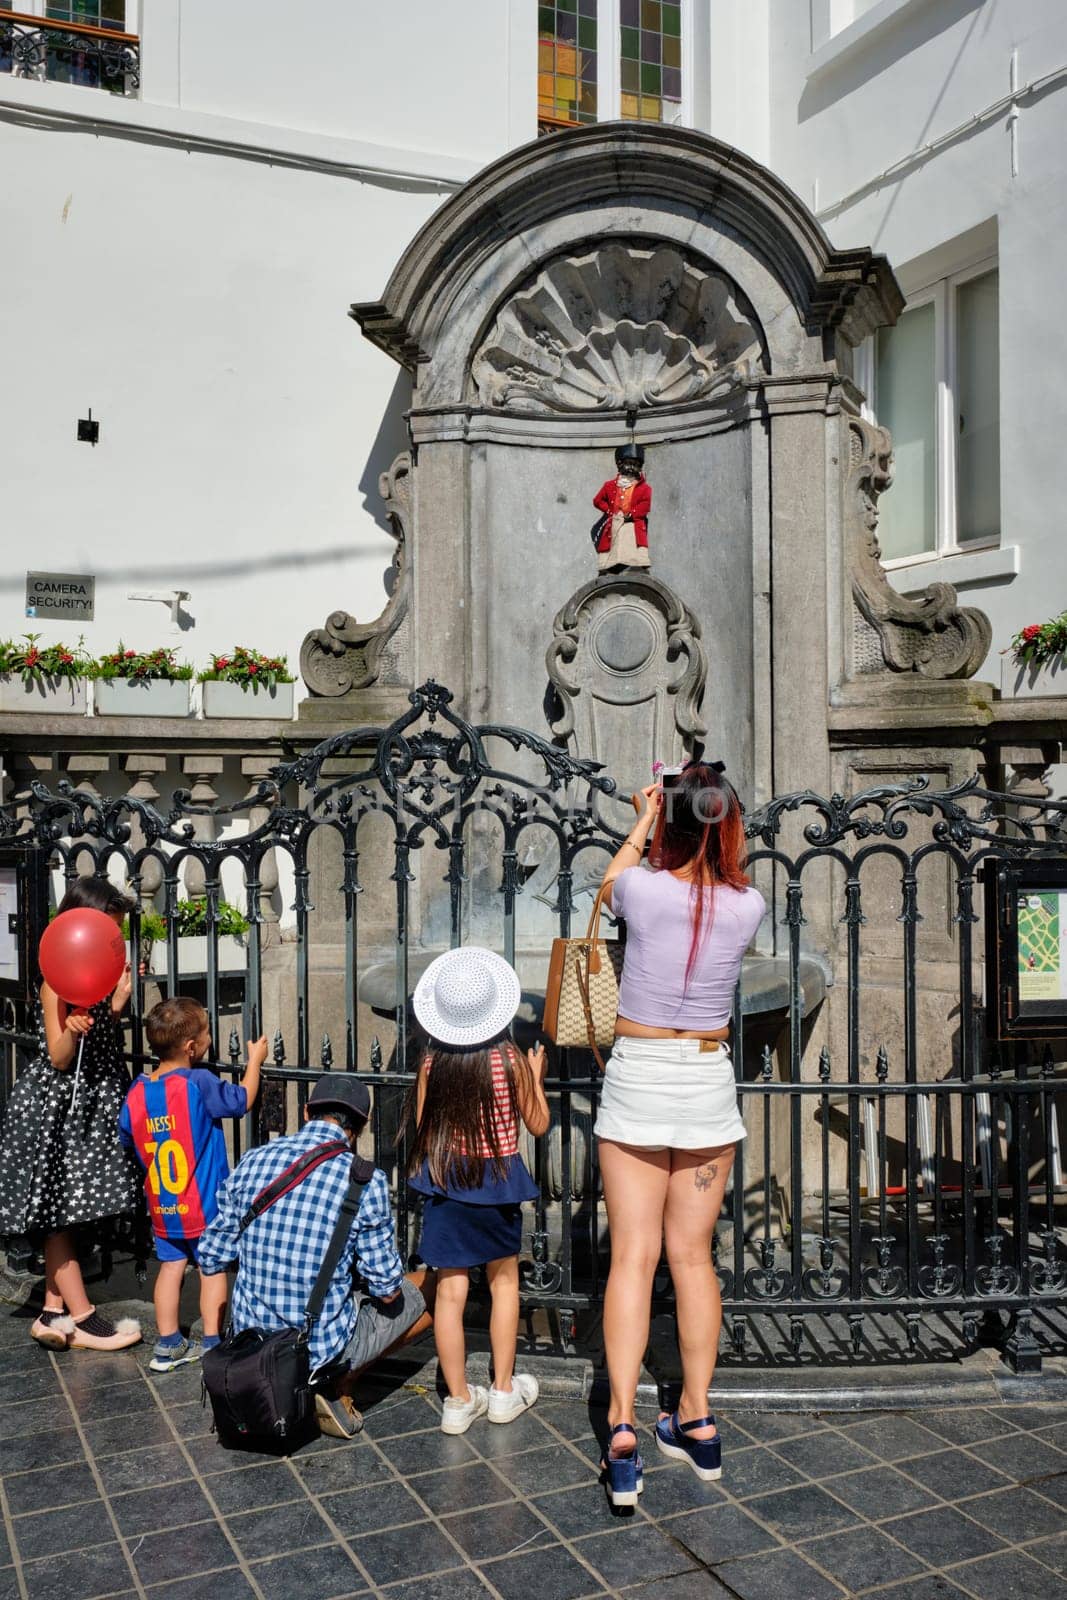 Tourist taking pictures in front of famous tourist attraction of Brussels - Manneken Pis statue by dimol